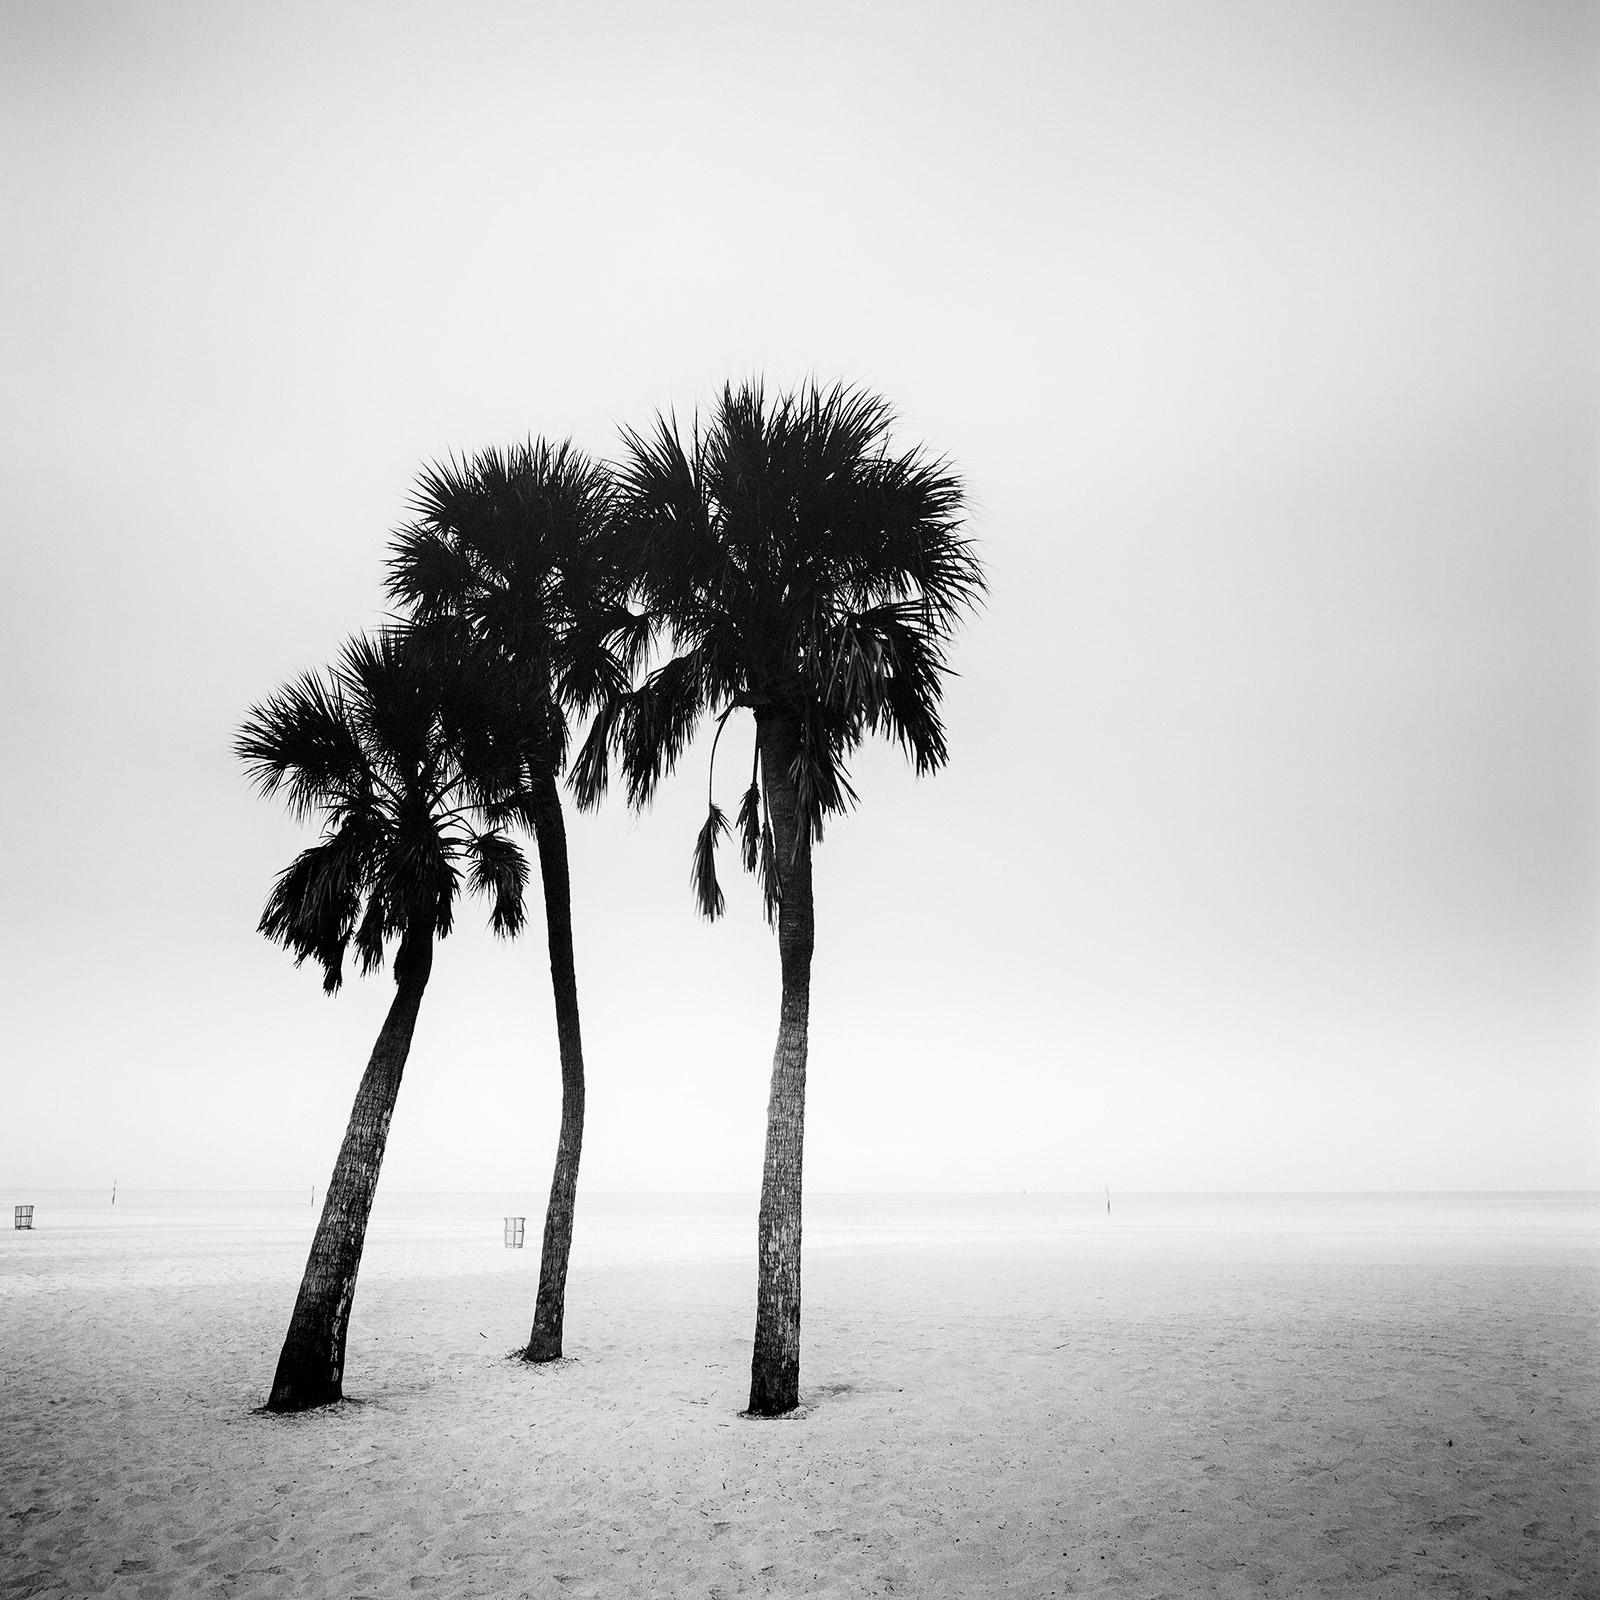 Gerald Berghammer Black and White Photograph - Palm Trees, lonley beach, Florida, USA, black and white photography, landscape